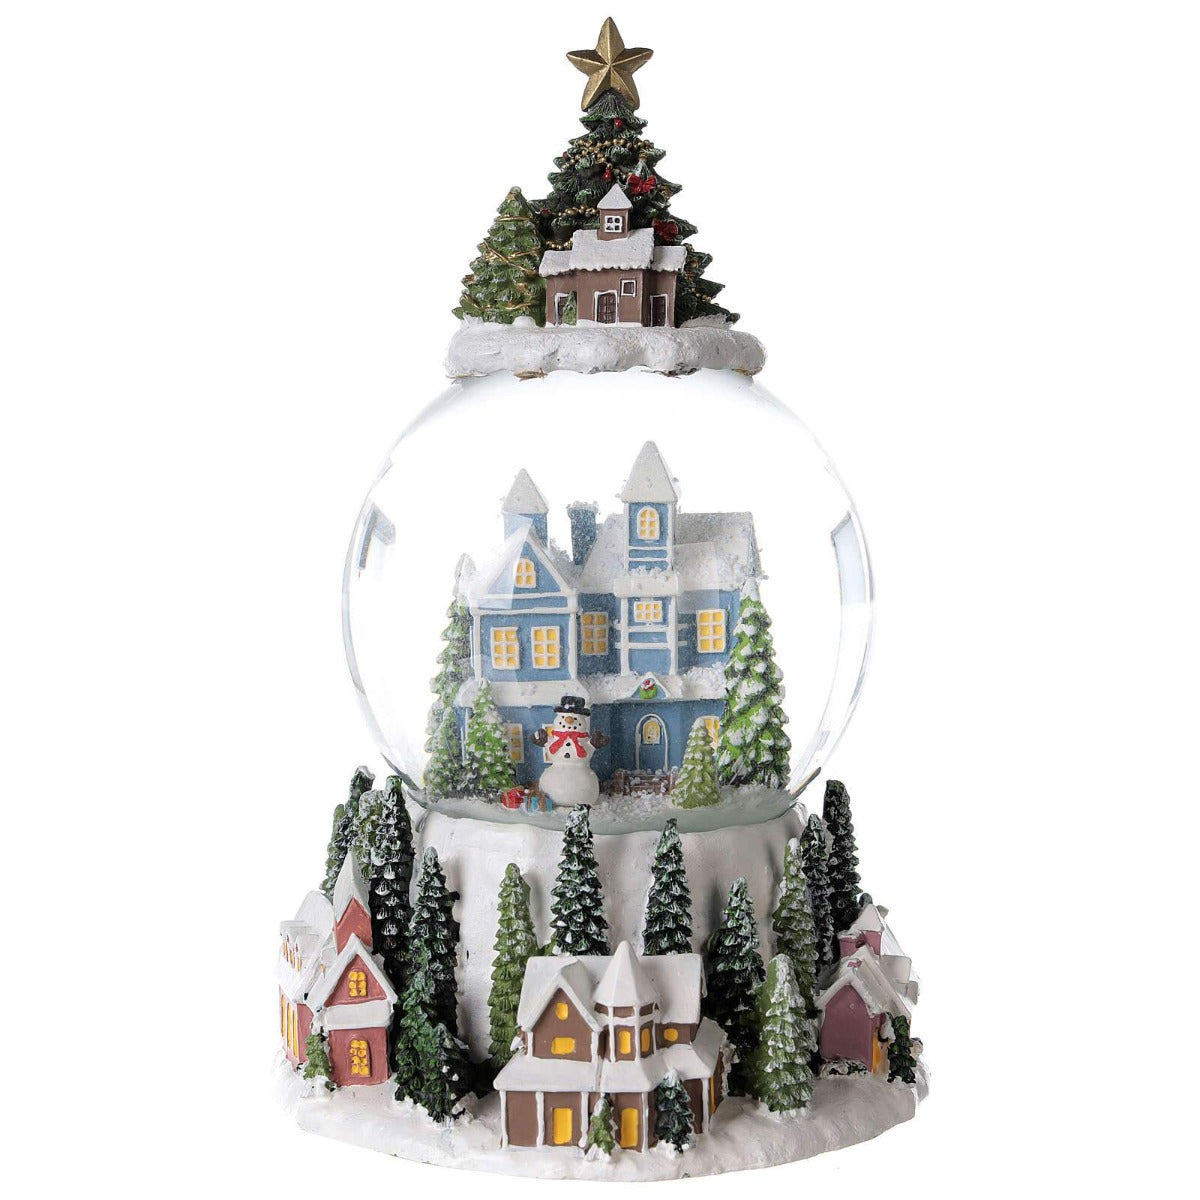 Musicboxworld Snow Globe Christmas Blue House with Snowman  Snow globe is a beautiful Christmas decoration that is treasured by people of all ages that captures the the magical moments of Christmas.